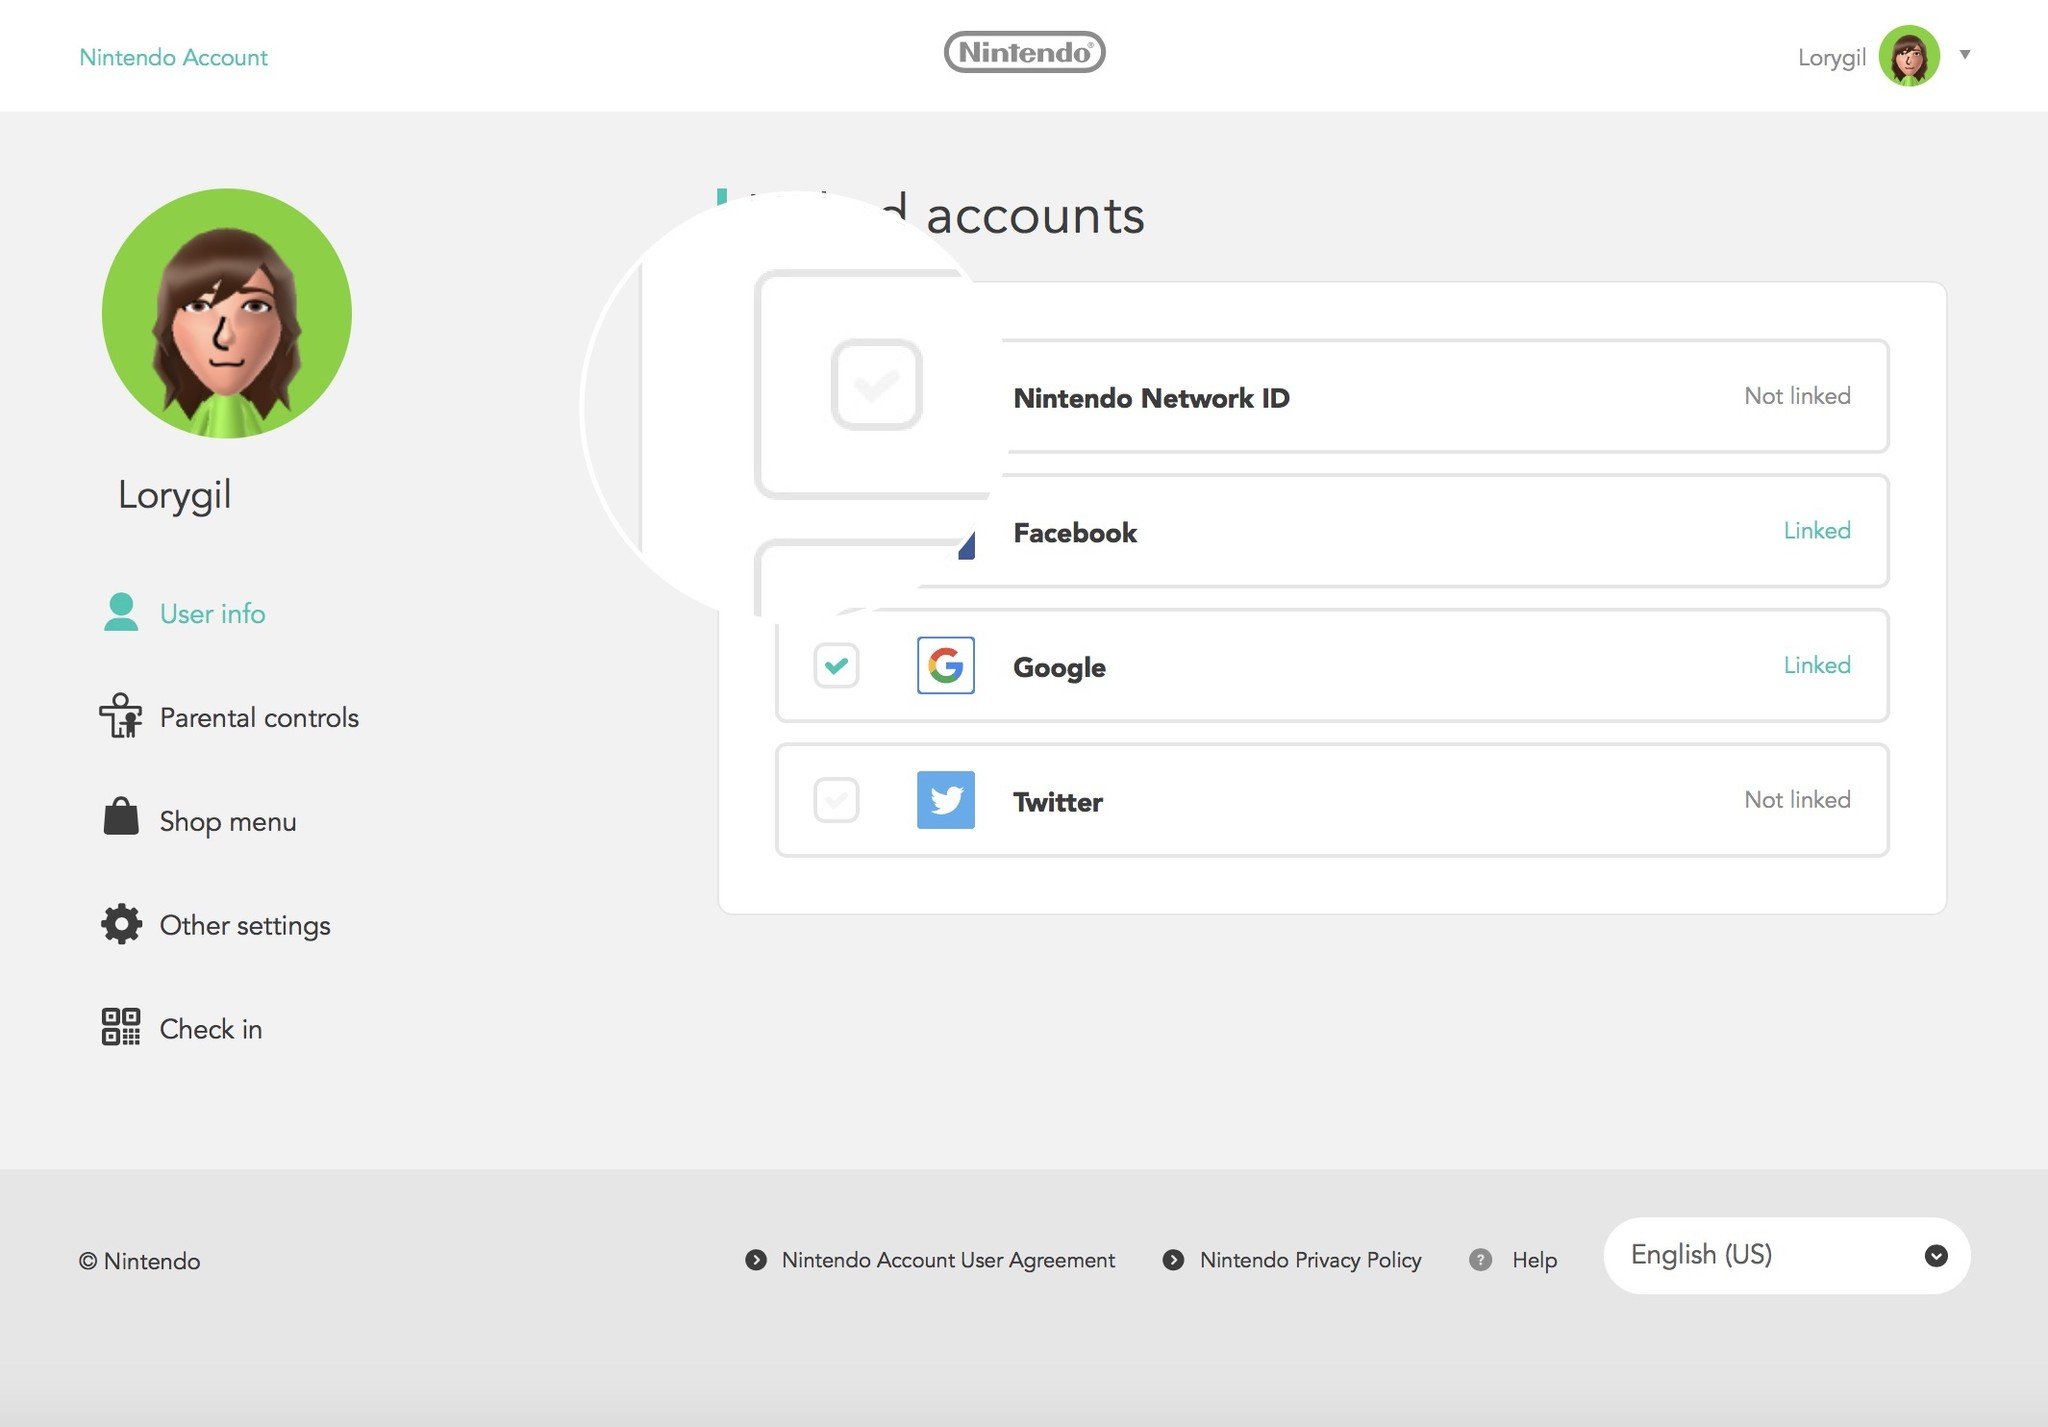 Link the Nintendo Network ID to the Nintendo Account by checking the box under NNID